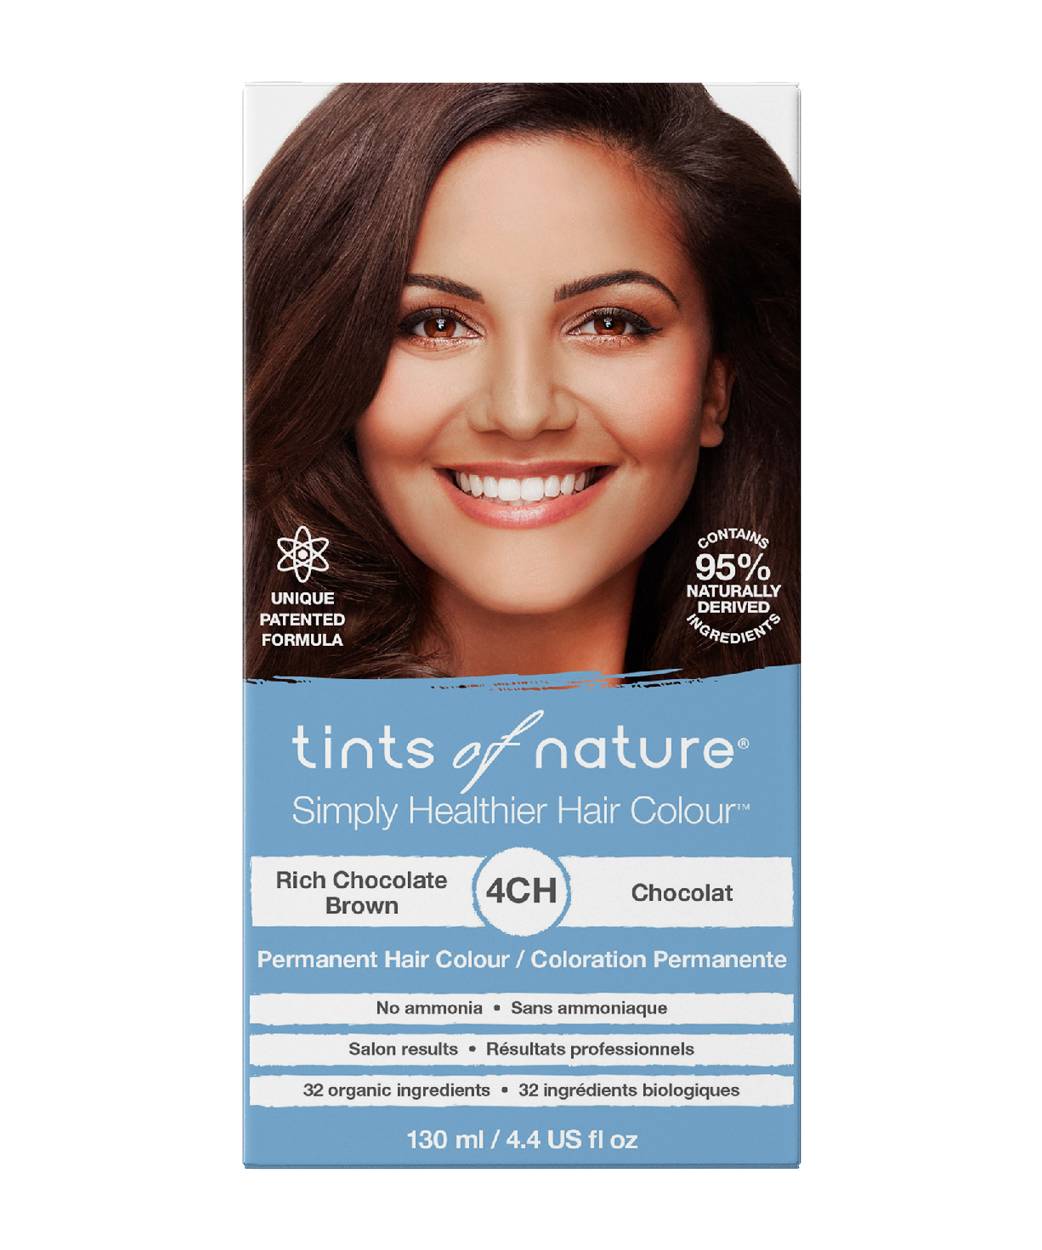 Tints Of Nature Permanent Hair Dye, Nourishes Hair & Covers Greys, 1 X 130Ml - 4Ch Rich Chocolate Br